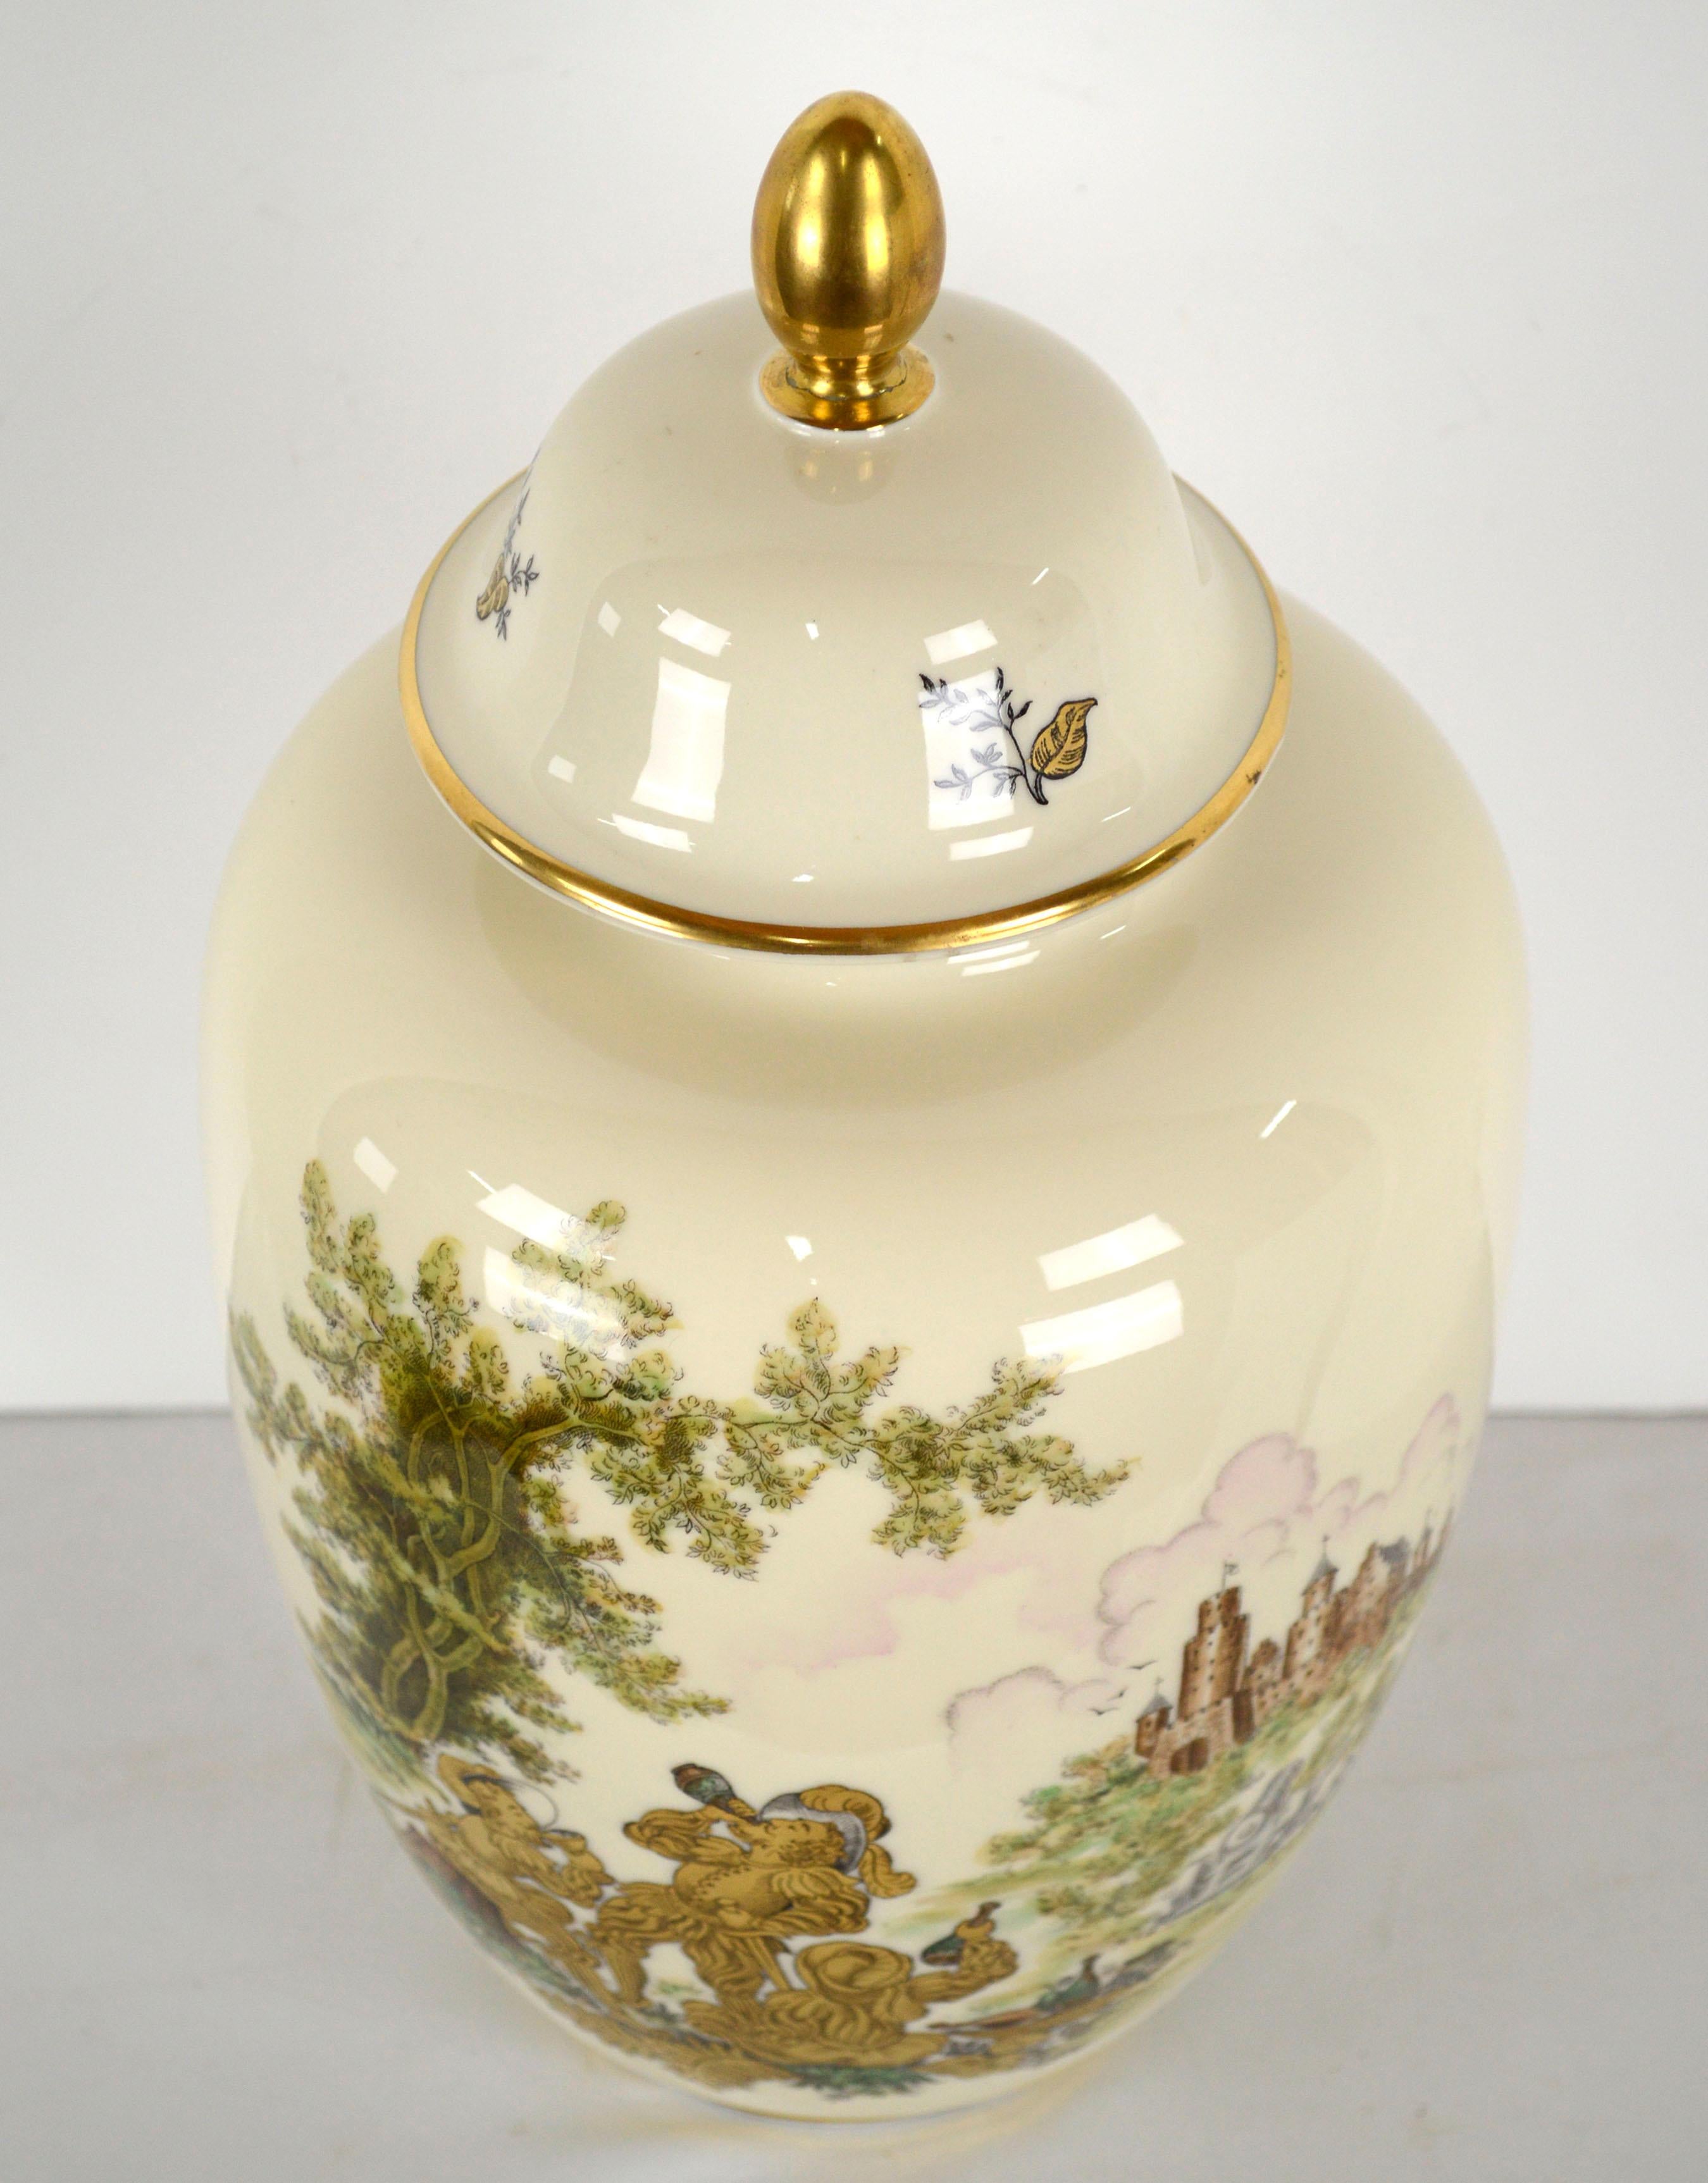 A lovely mid-century Bavarian porcelain ginger jar with gold trim and gilt details by Hertel-Jacob Porzellan (German, 1906-1979). This large ginger jar is ornately decorated with a highly detailed romantic figurative landscape scene, in which three